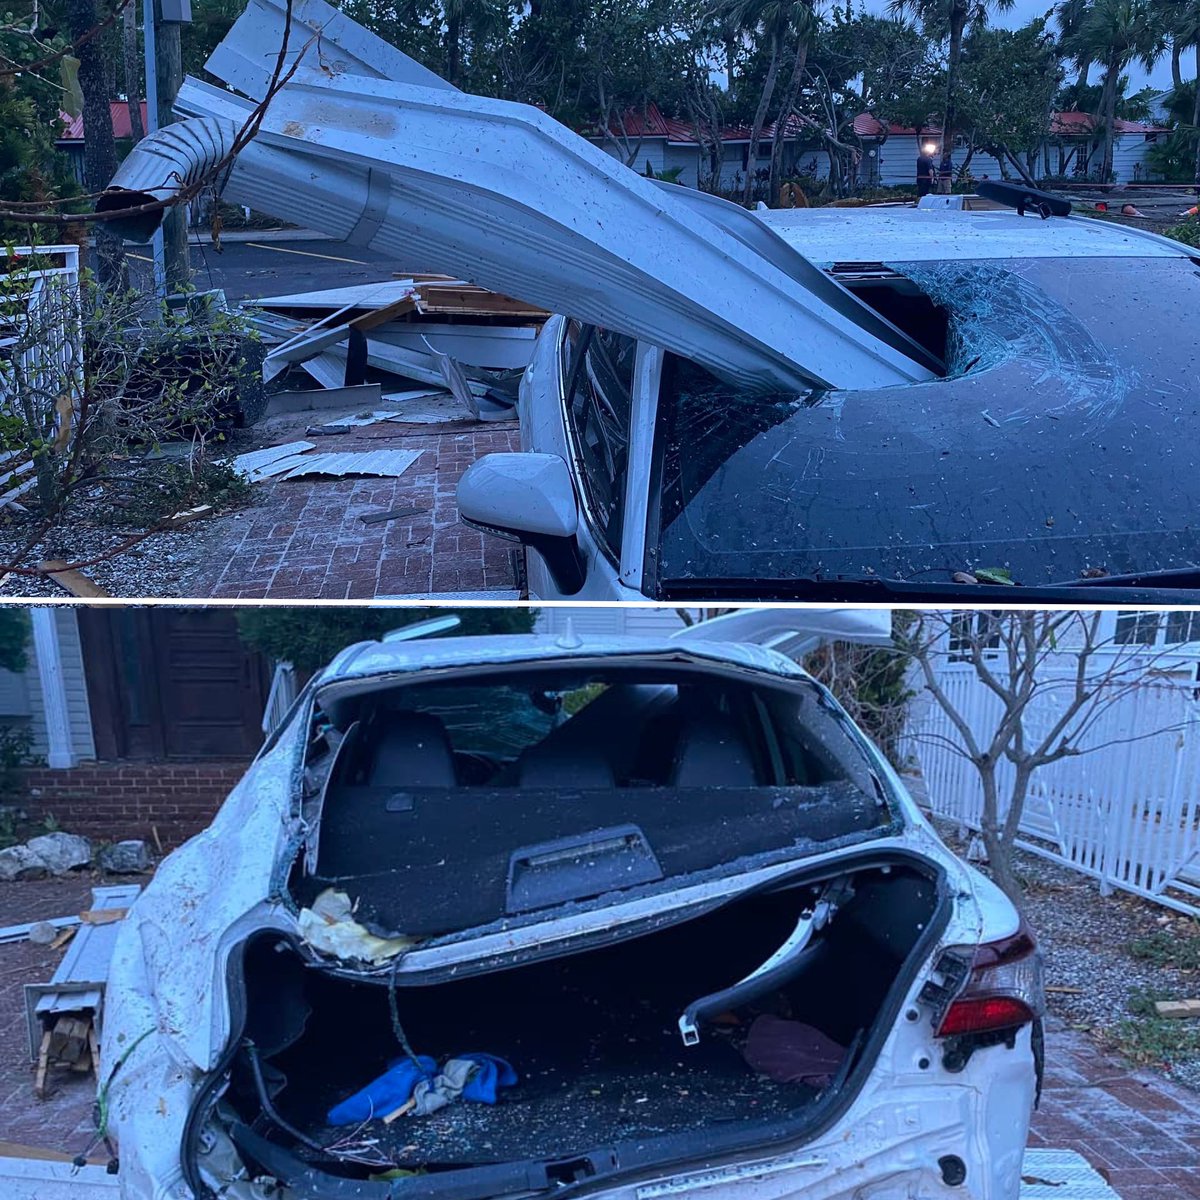 Clearwater Beach residents woke up to some serious damage after a tornado blew through overnight